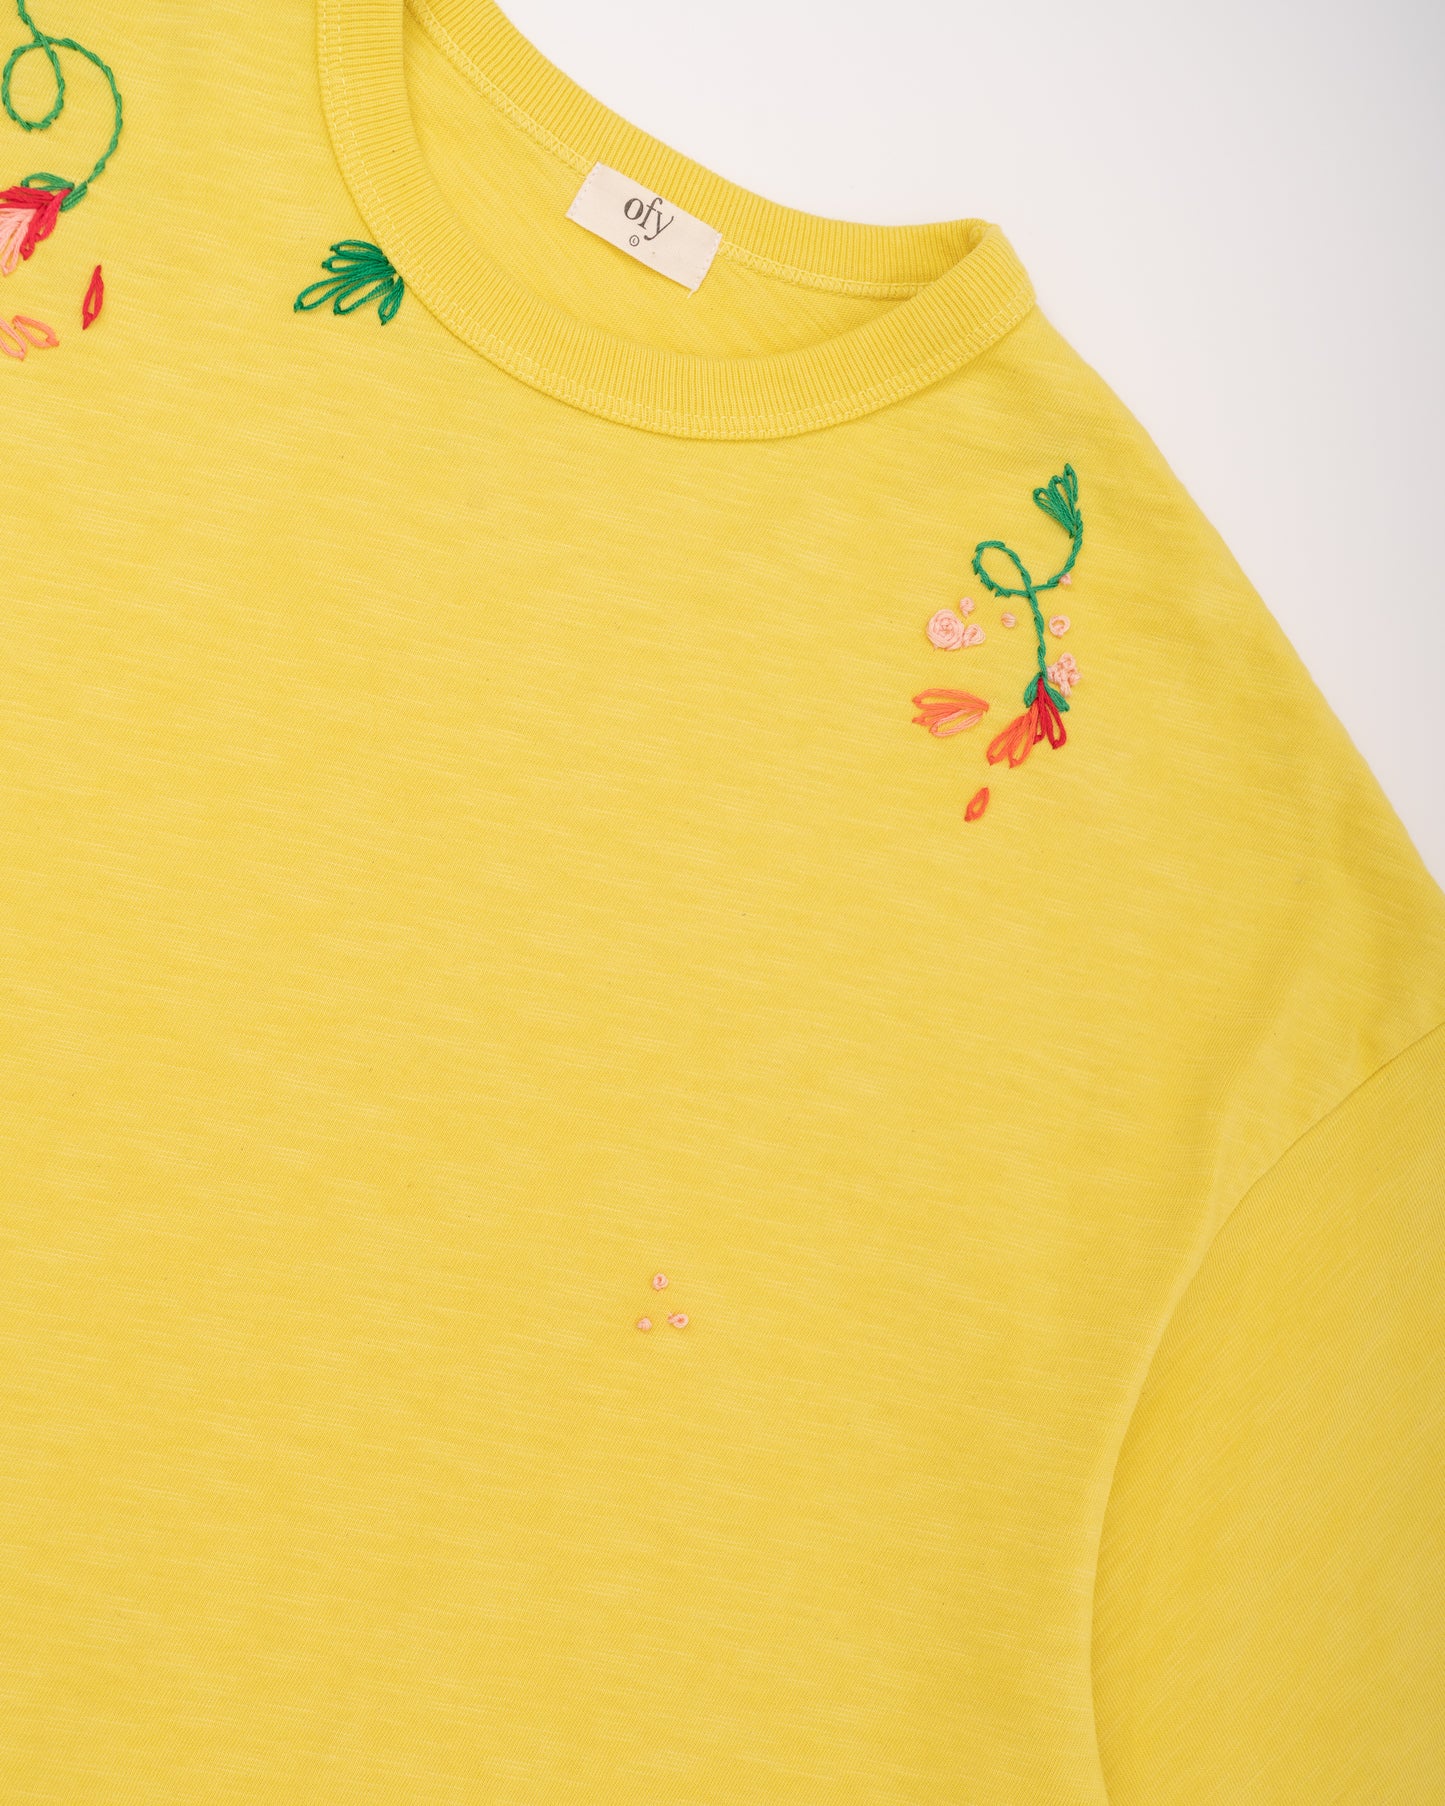 Journey Tee - Yellow Floral